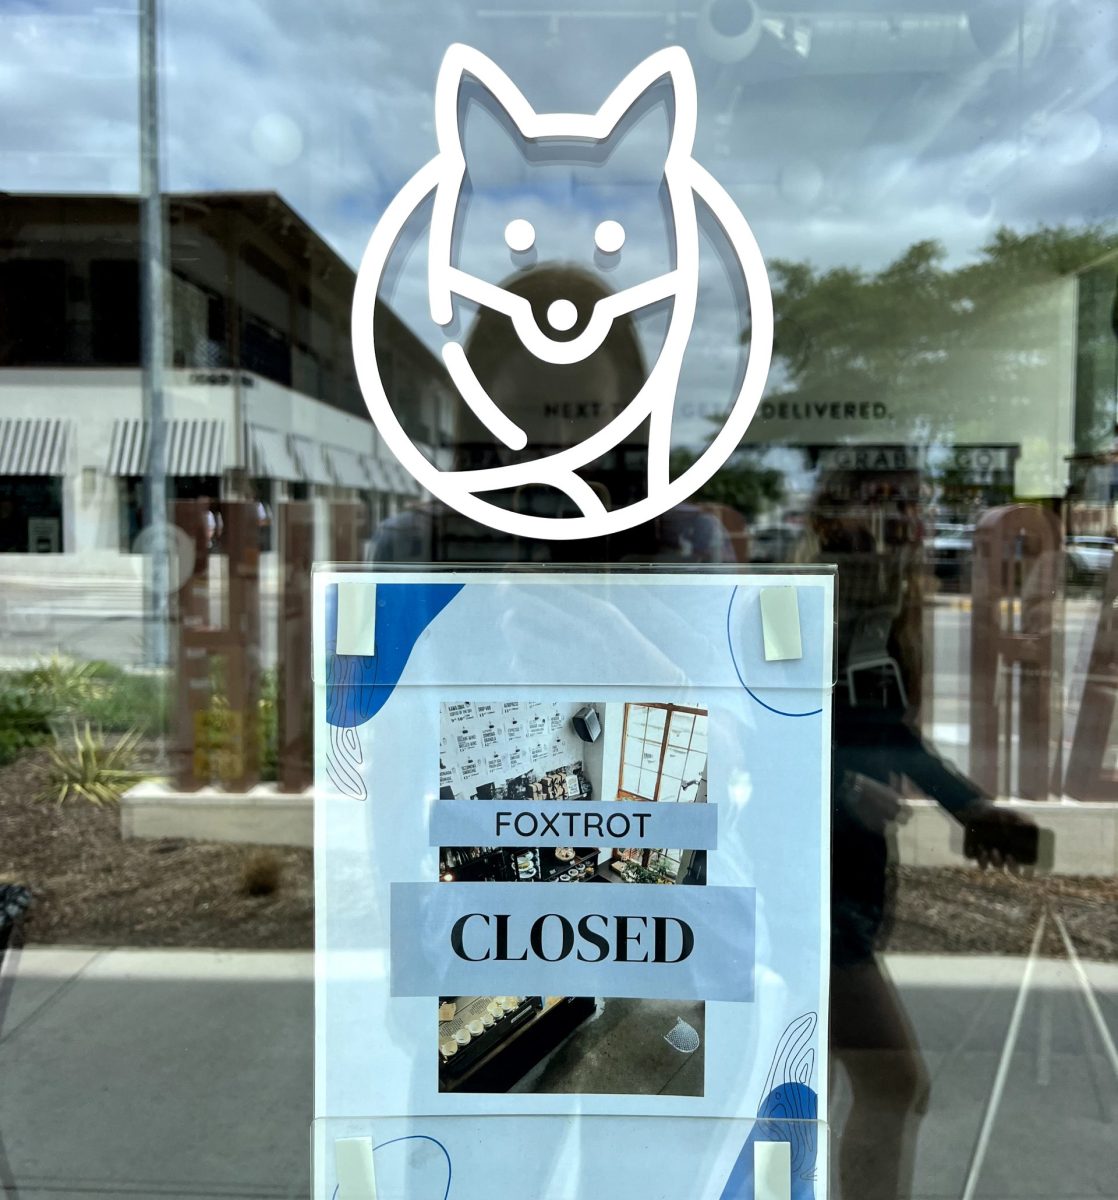 A closed sign appeared on the door of Foxtrot's Hillcrest location across from SMU at around 11 a.m. Tuesday morning.